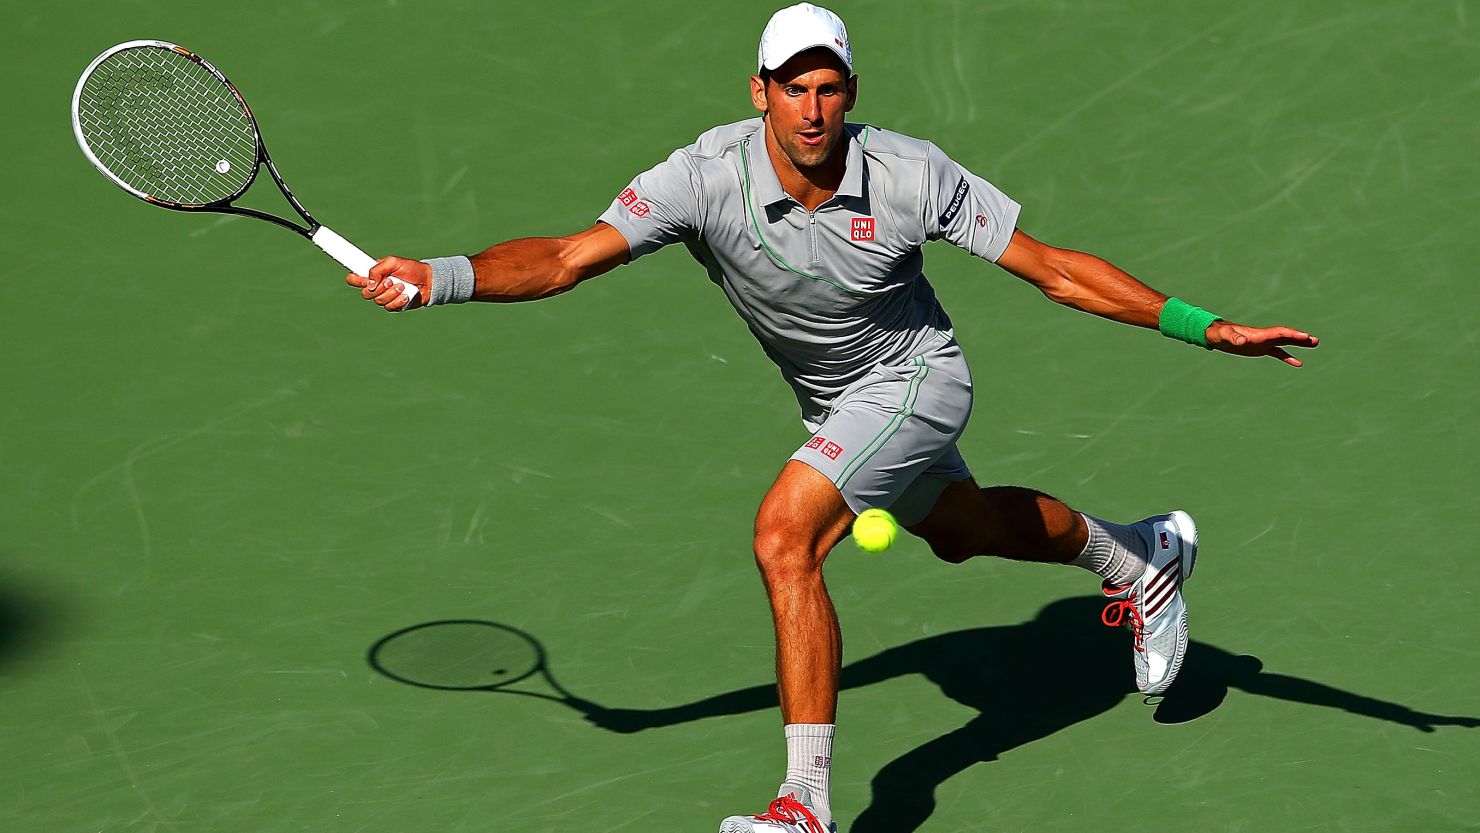 Novak Djokovic moved into the semifinals in Miami after beating Andy Murray 7-5 6-3.